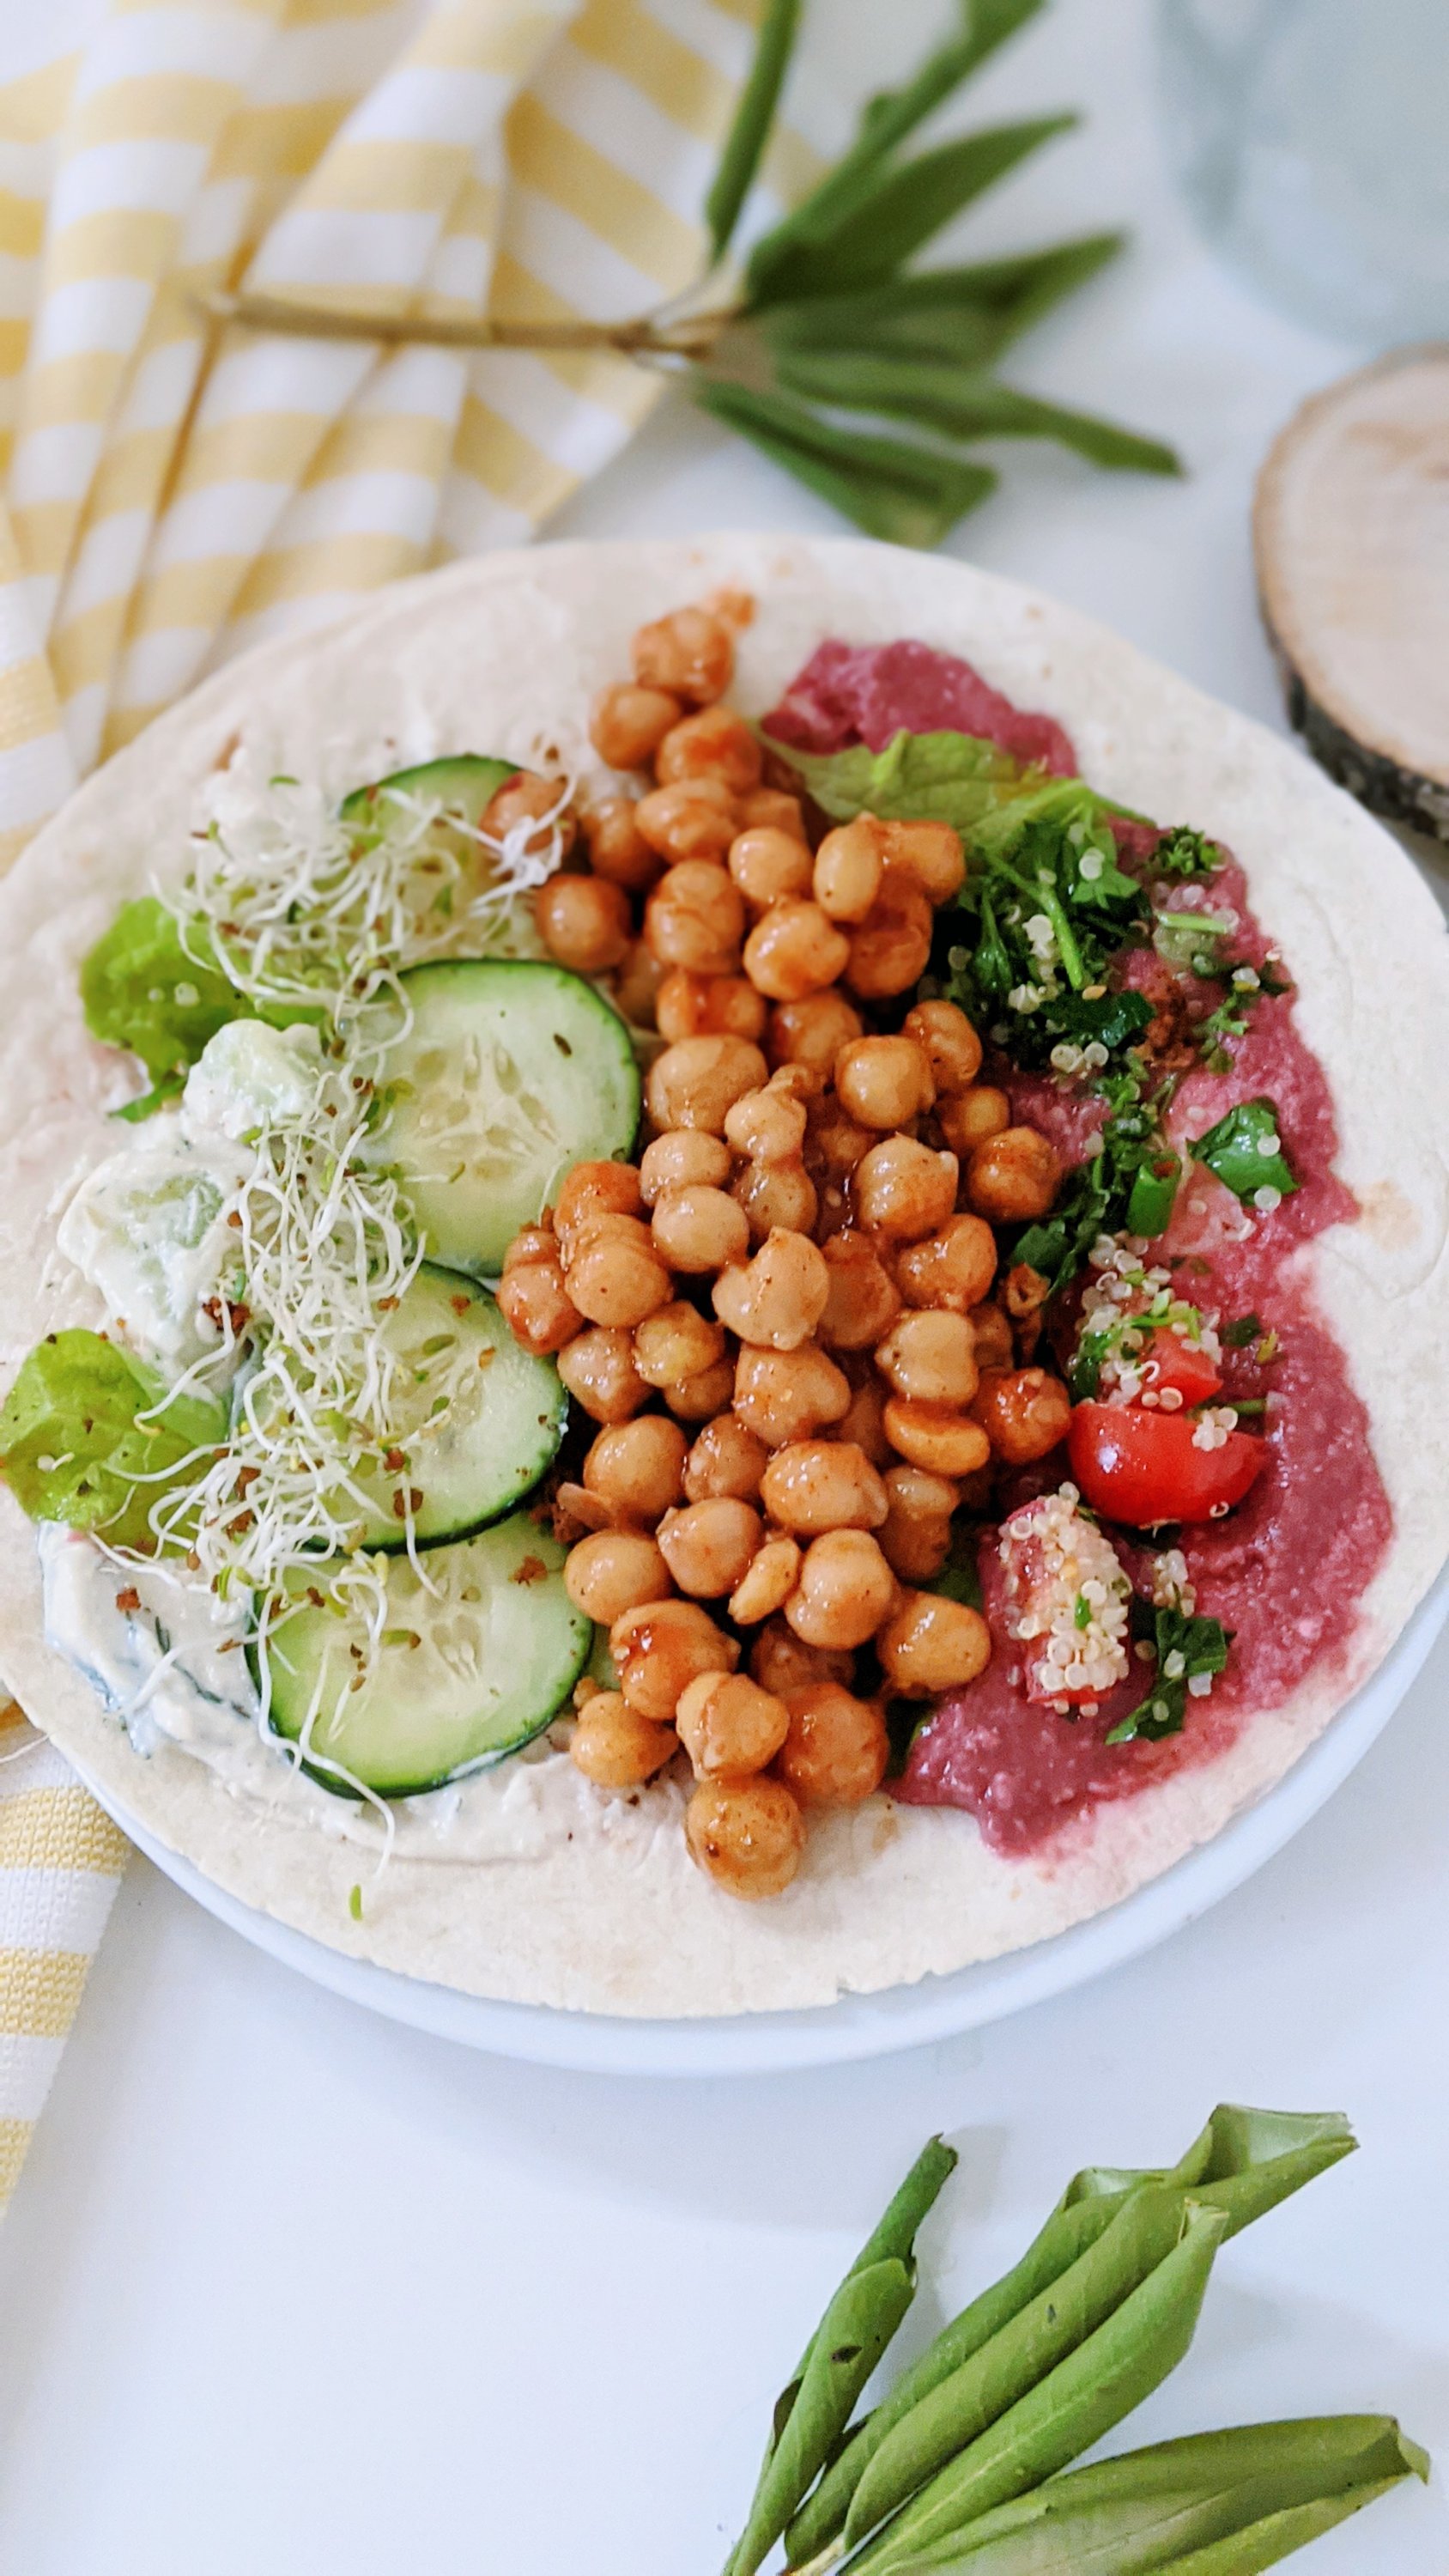 shawarma spiced chickpea recipe pita wrap garbanzo beans california grown recipes healthy chickpea lunch ideas canned chickpeas at home wrap and sandwiches with beans vegan gluten free shwarma